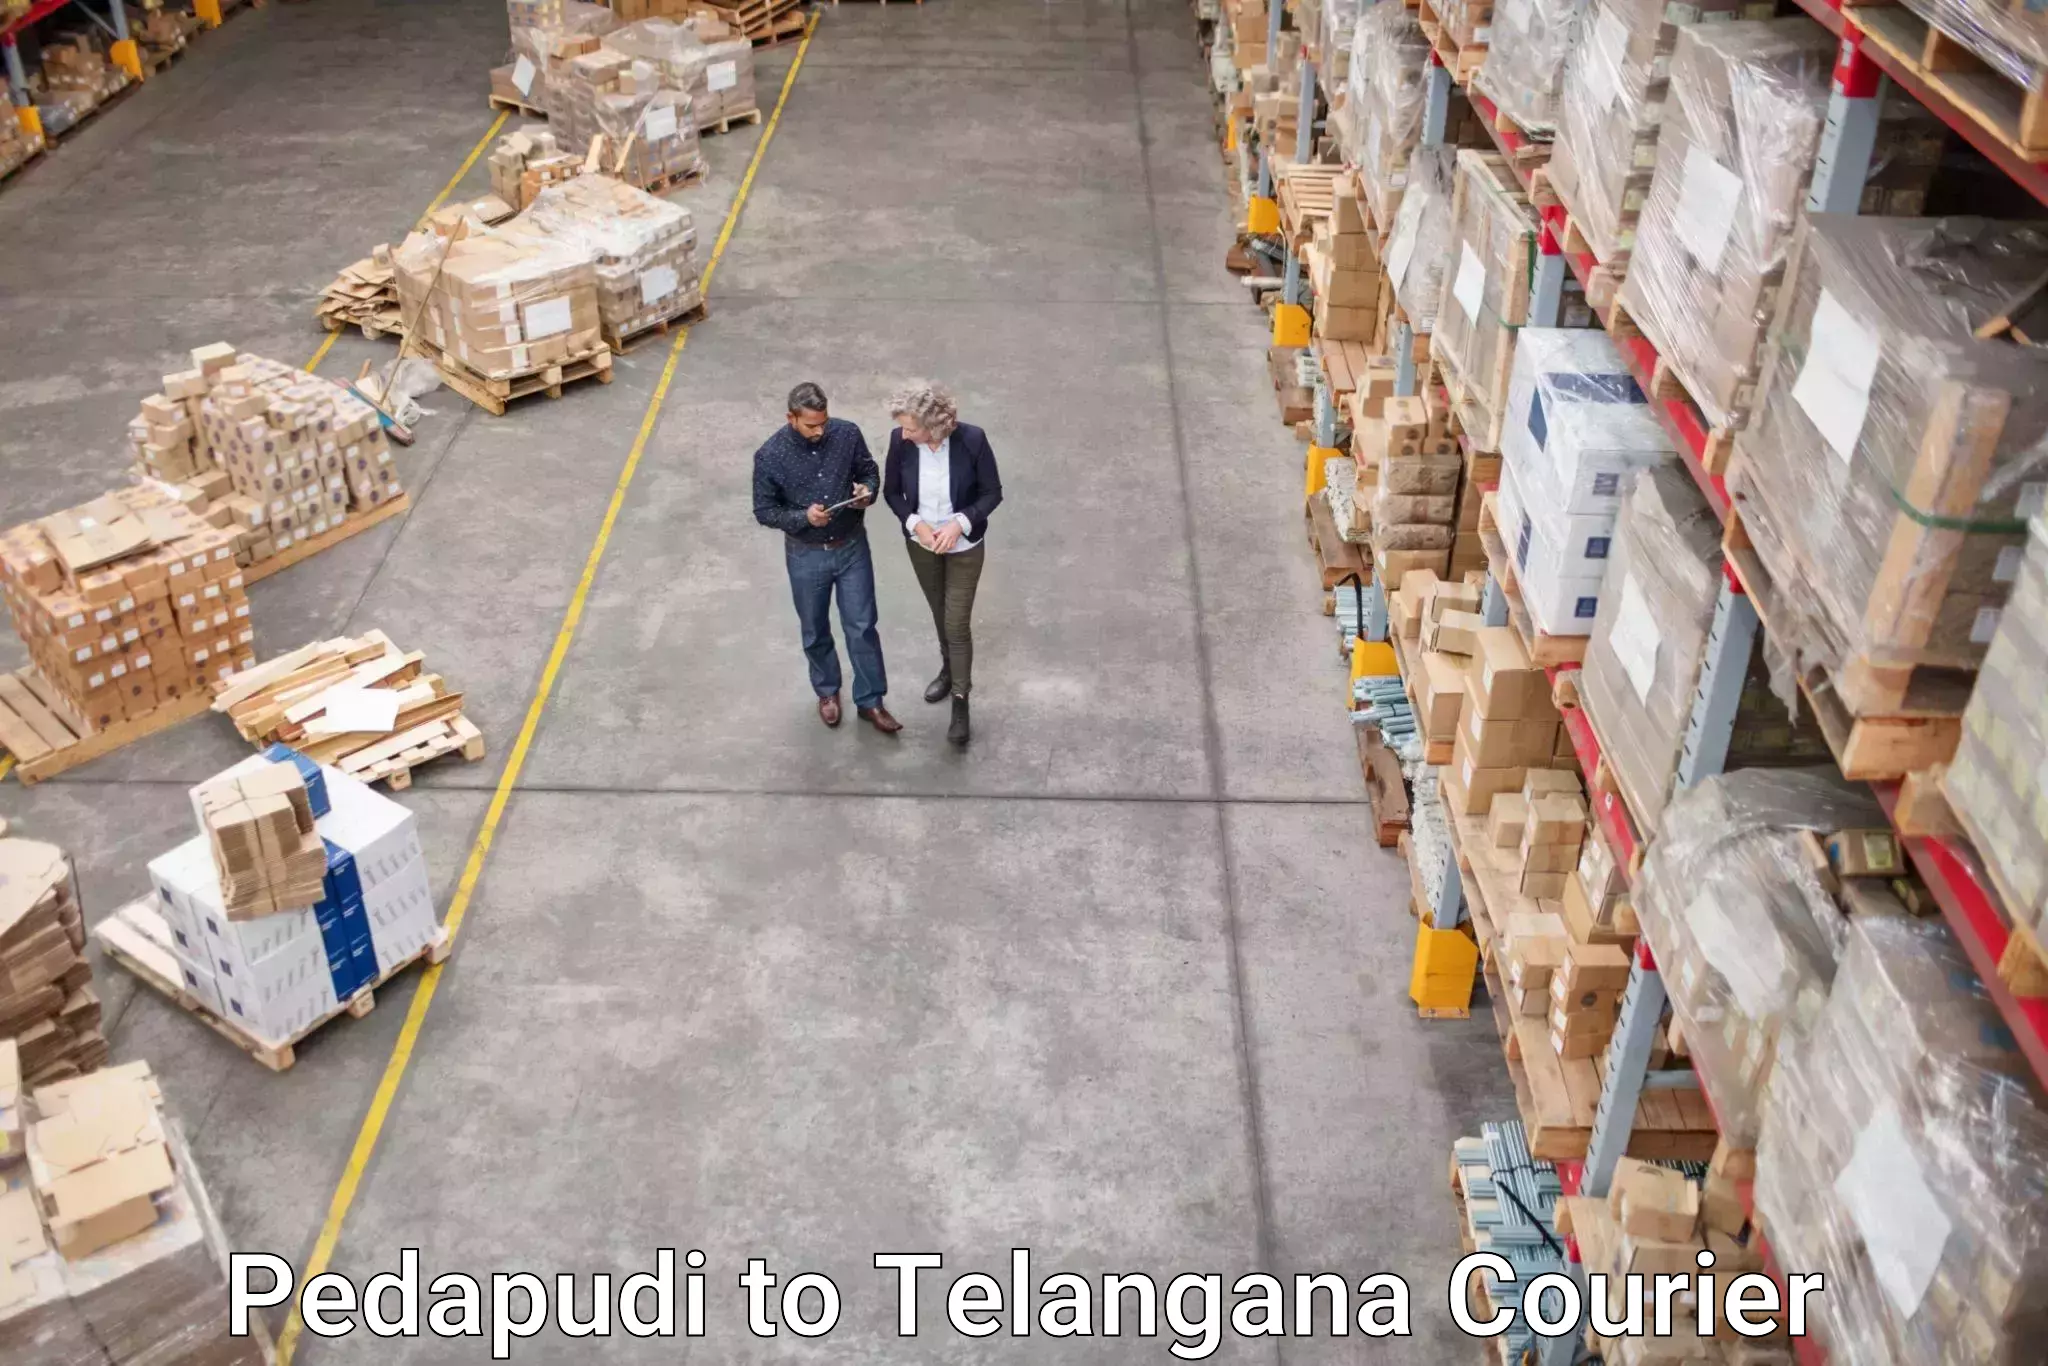 Discounted shipping Pedapudi to Amangal